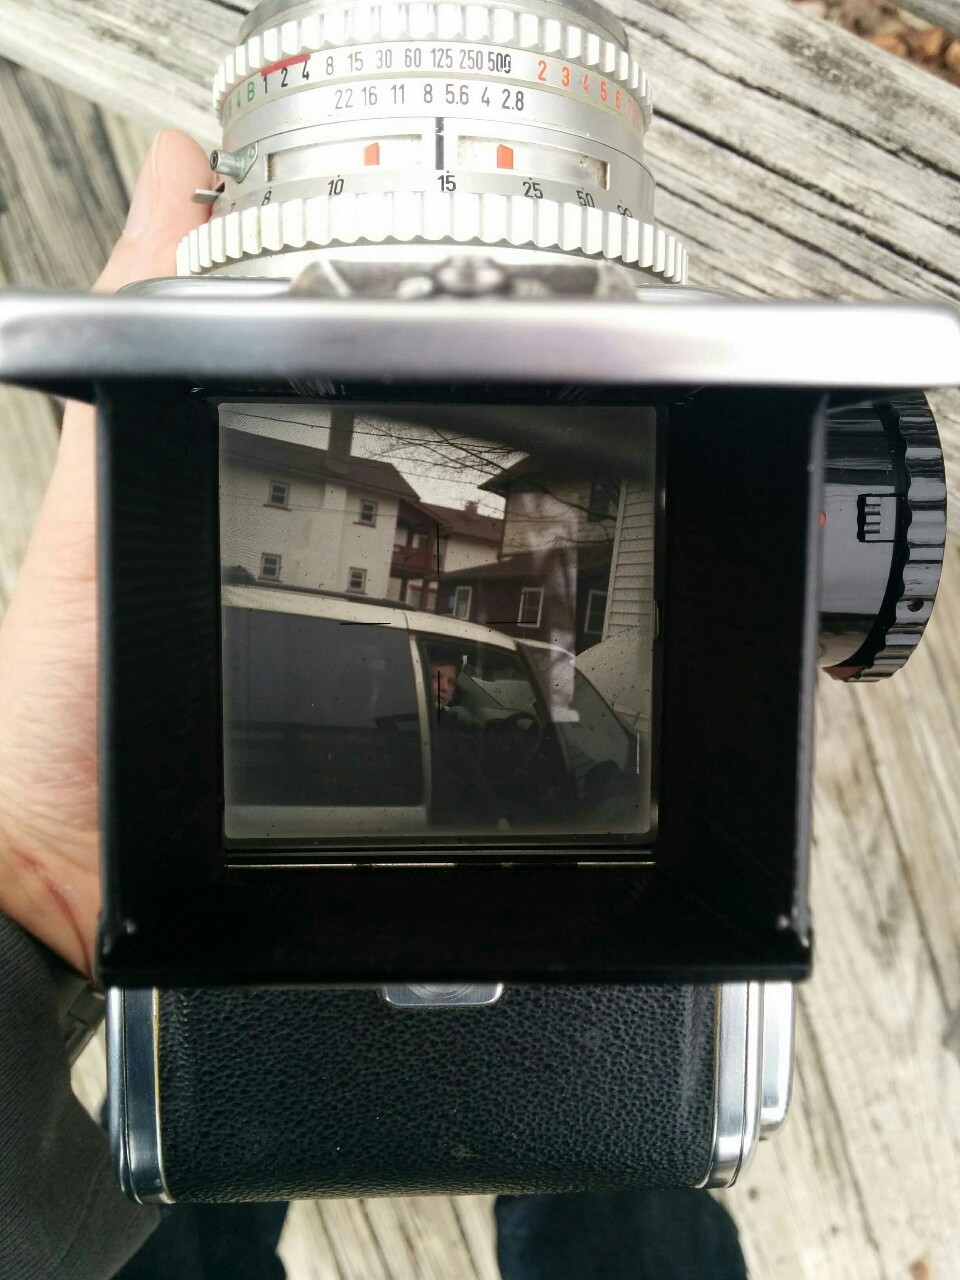 The Hasselblad 500C viewfinder is a waist-level viewfinder. The viewfinder is at the top of the camera, and you look down into it.